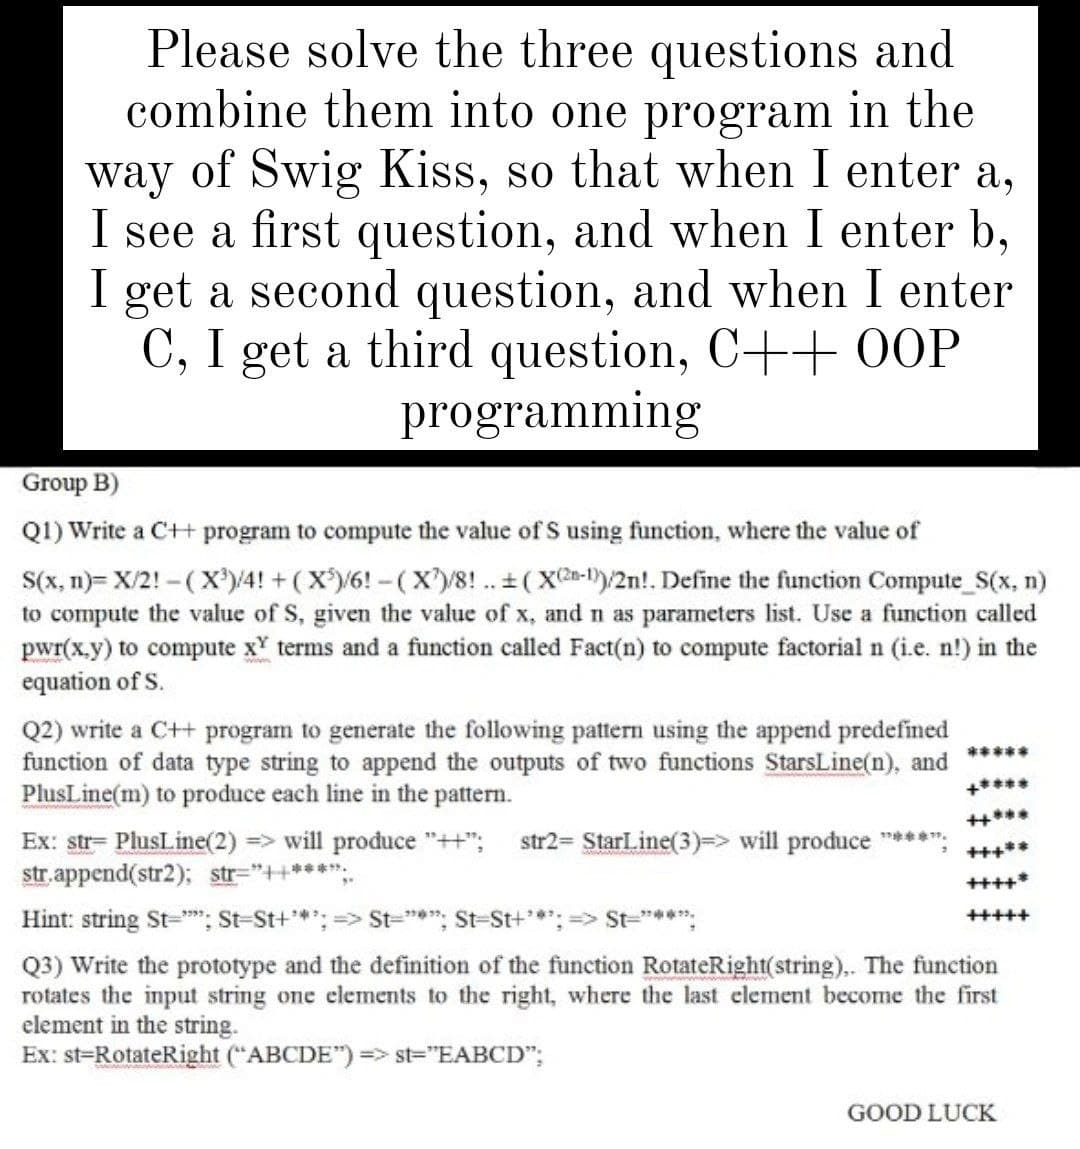 Please solve the three questions and
combine them into one program in the
way of Swig Kiss, so that when I enter a,
I see a first question, and when I enter b,
I get a second question, and when I enter
C, I get a third question, C++ 0OOP
programming
Group B)
Q1) Write a C+H program to compute the value of S using function, where the value of
S(x, n)= X/2! - (X®)/4! + ( X)/6! - (X)/8! .. + (X-1)/2n!. Define the function Compute_S(x, n)
to compute the value of S, given the value of x, and n as parameters list. Use a function called
pwr(x.y) to compute x' terms and a function called Fact(n) to compute factorial n (i.e. n!) in the
equation of S.
Q2) write a C++ program to generate the following pattern using the append predefined
function of data type string to append the outputs of two functions StarsLine(n), and
PlusLine(m) to produce each line in the pattern.
*****
+****
Ex: str= PlusLine(2) => will produce "++";
str. append(str2); str="++***";.
str2= StarLine(3)=> will produce ****:
+++**
++++*
Hint: string St="; St-St+*; => St="*"; St-St+*: => St="***:
+++++
Q3) Write the prototype and the definition of the function RotateRight(string),. The function
rotates the input string one elements to the right, where the last element become the first
element in the string.
Ex: st=RotateRight ("ABCDE") => st="EABCD";
GOOD LUCK
